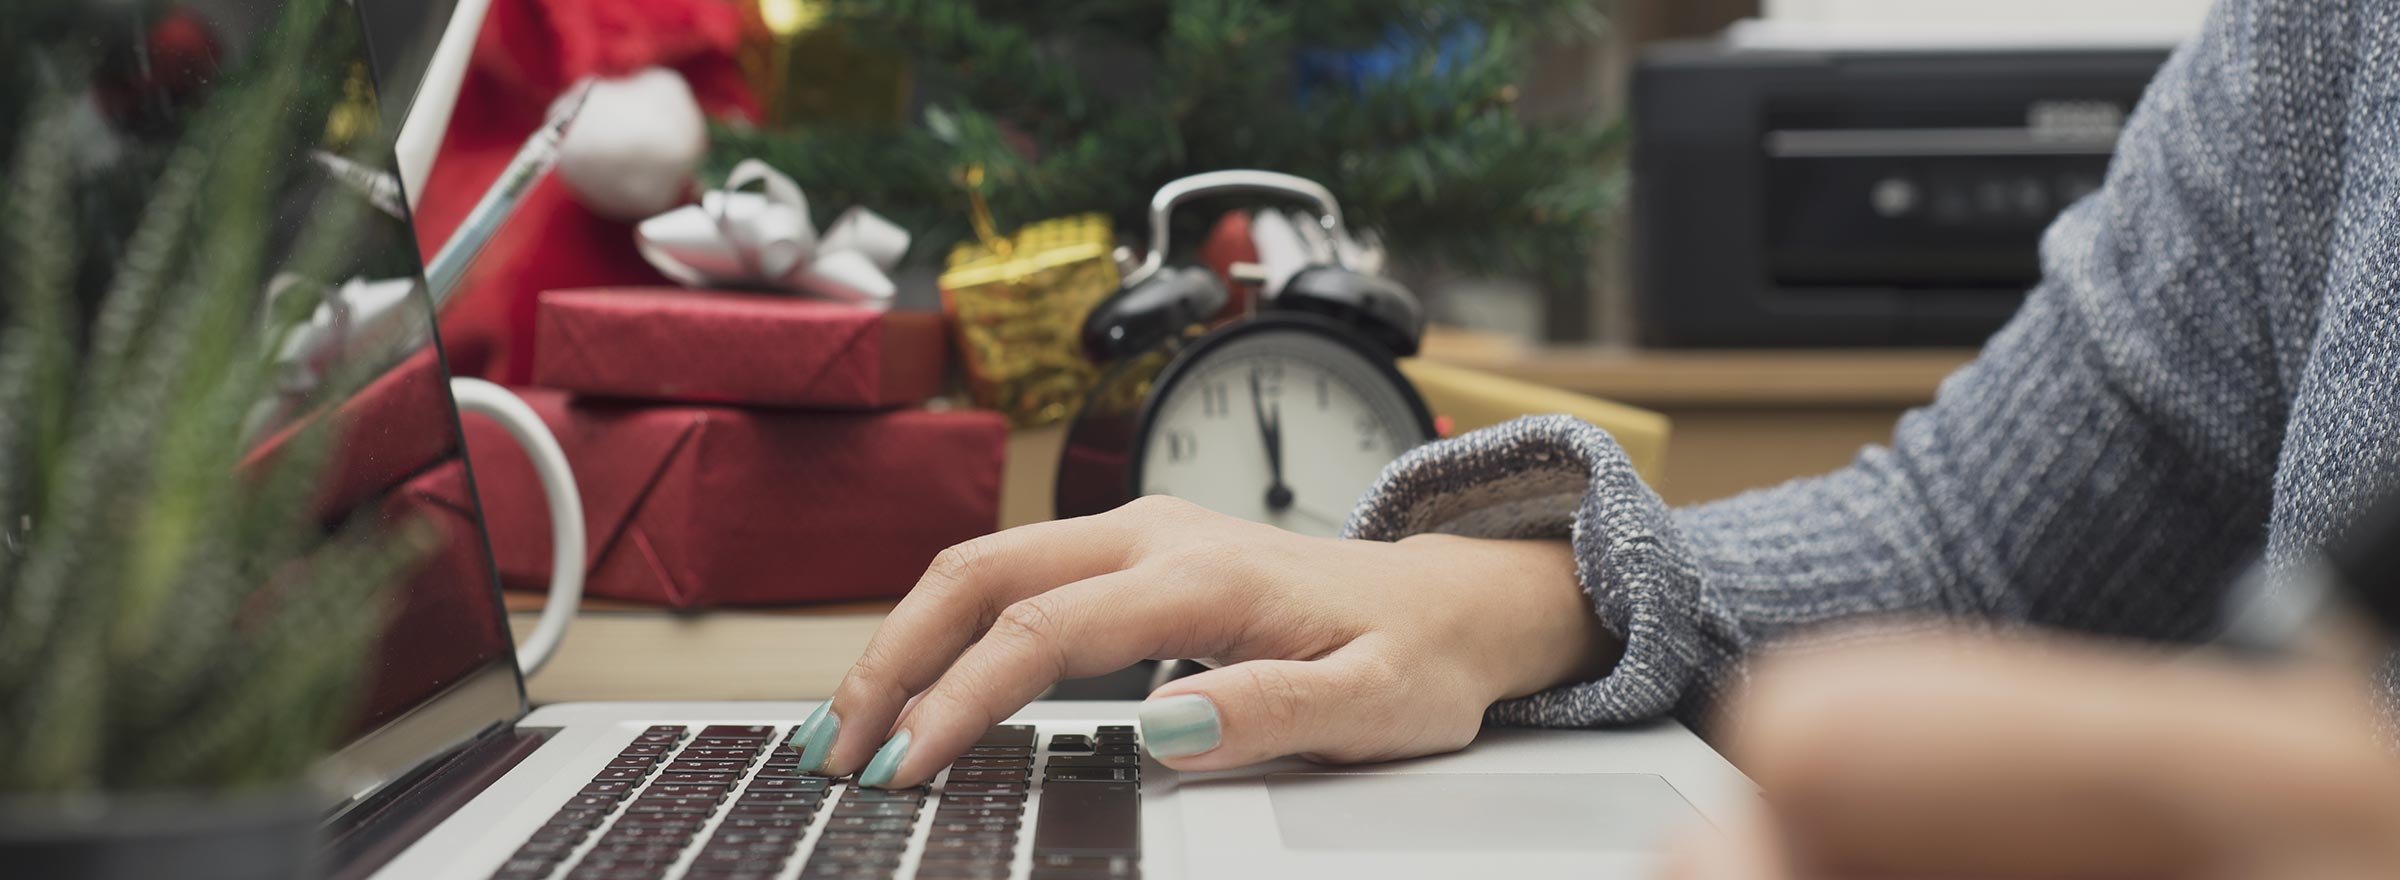 hand on laptop computer; in background, wrapped gifts and a clock with hands nearly at 12